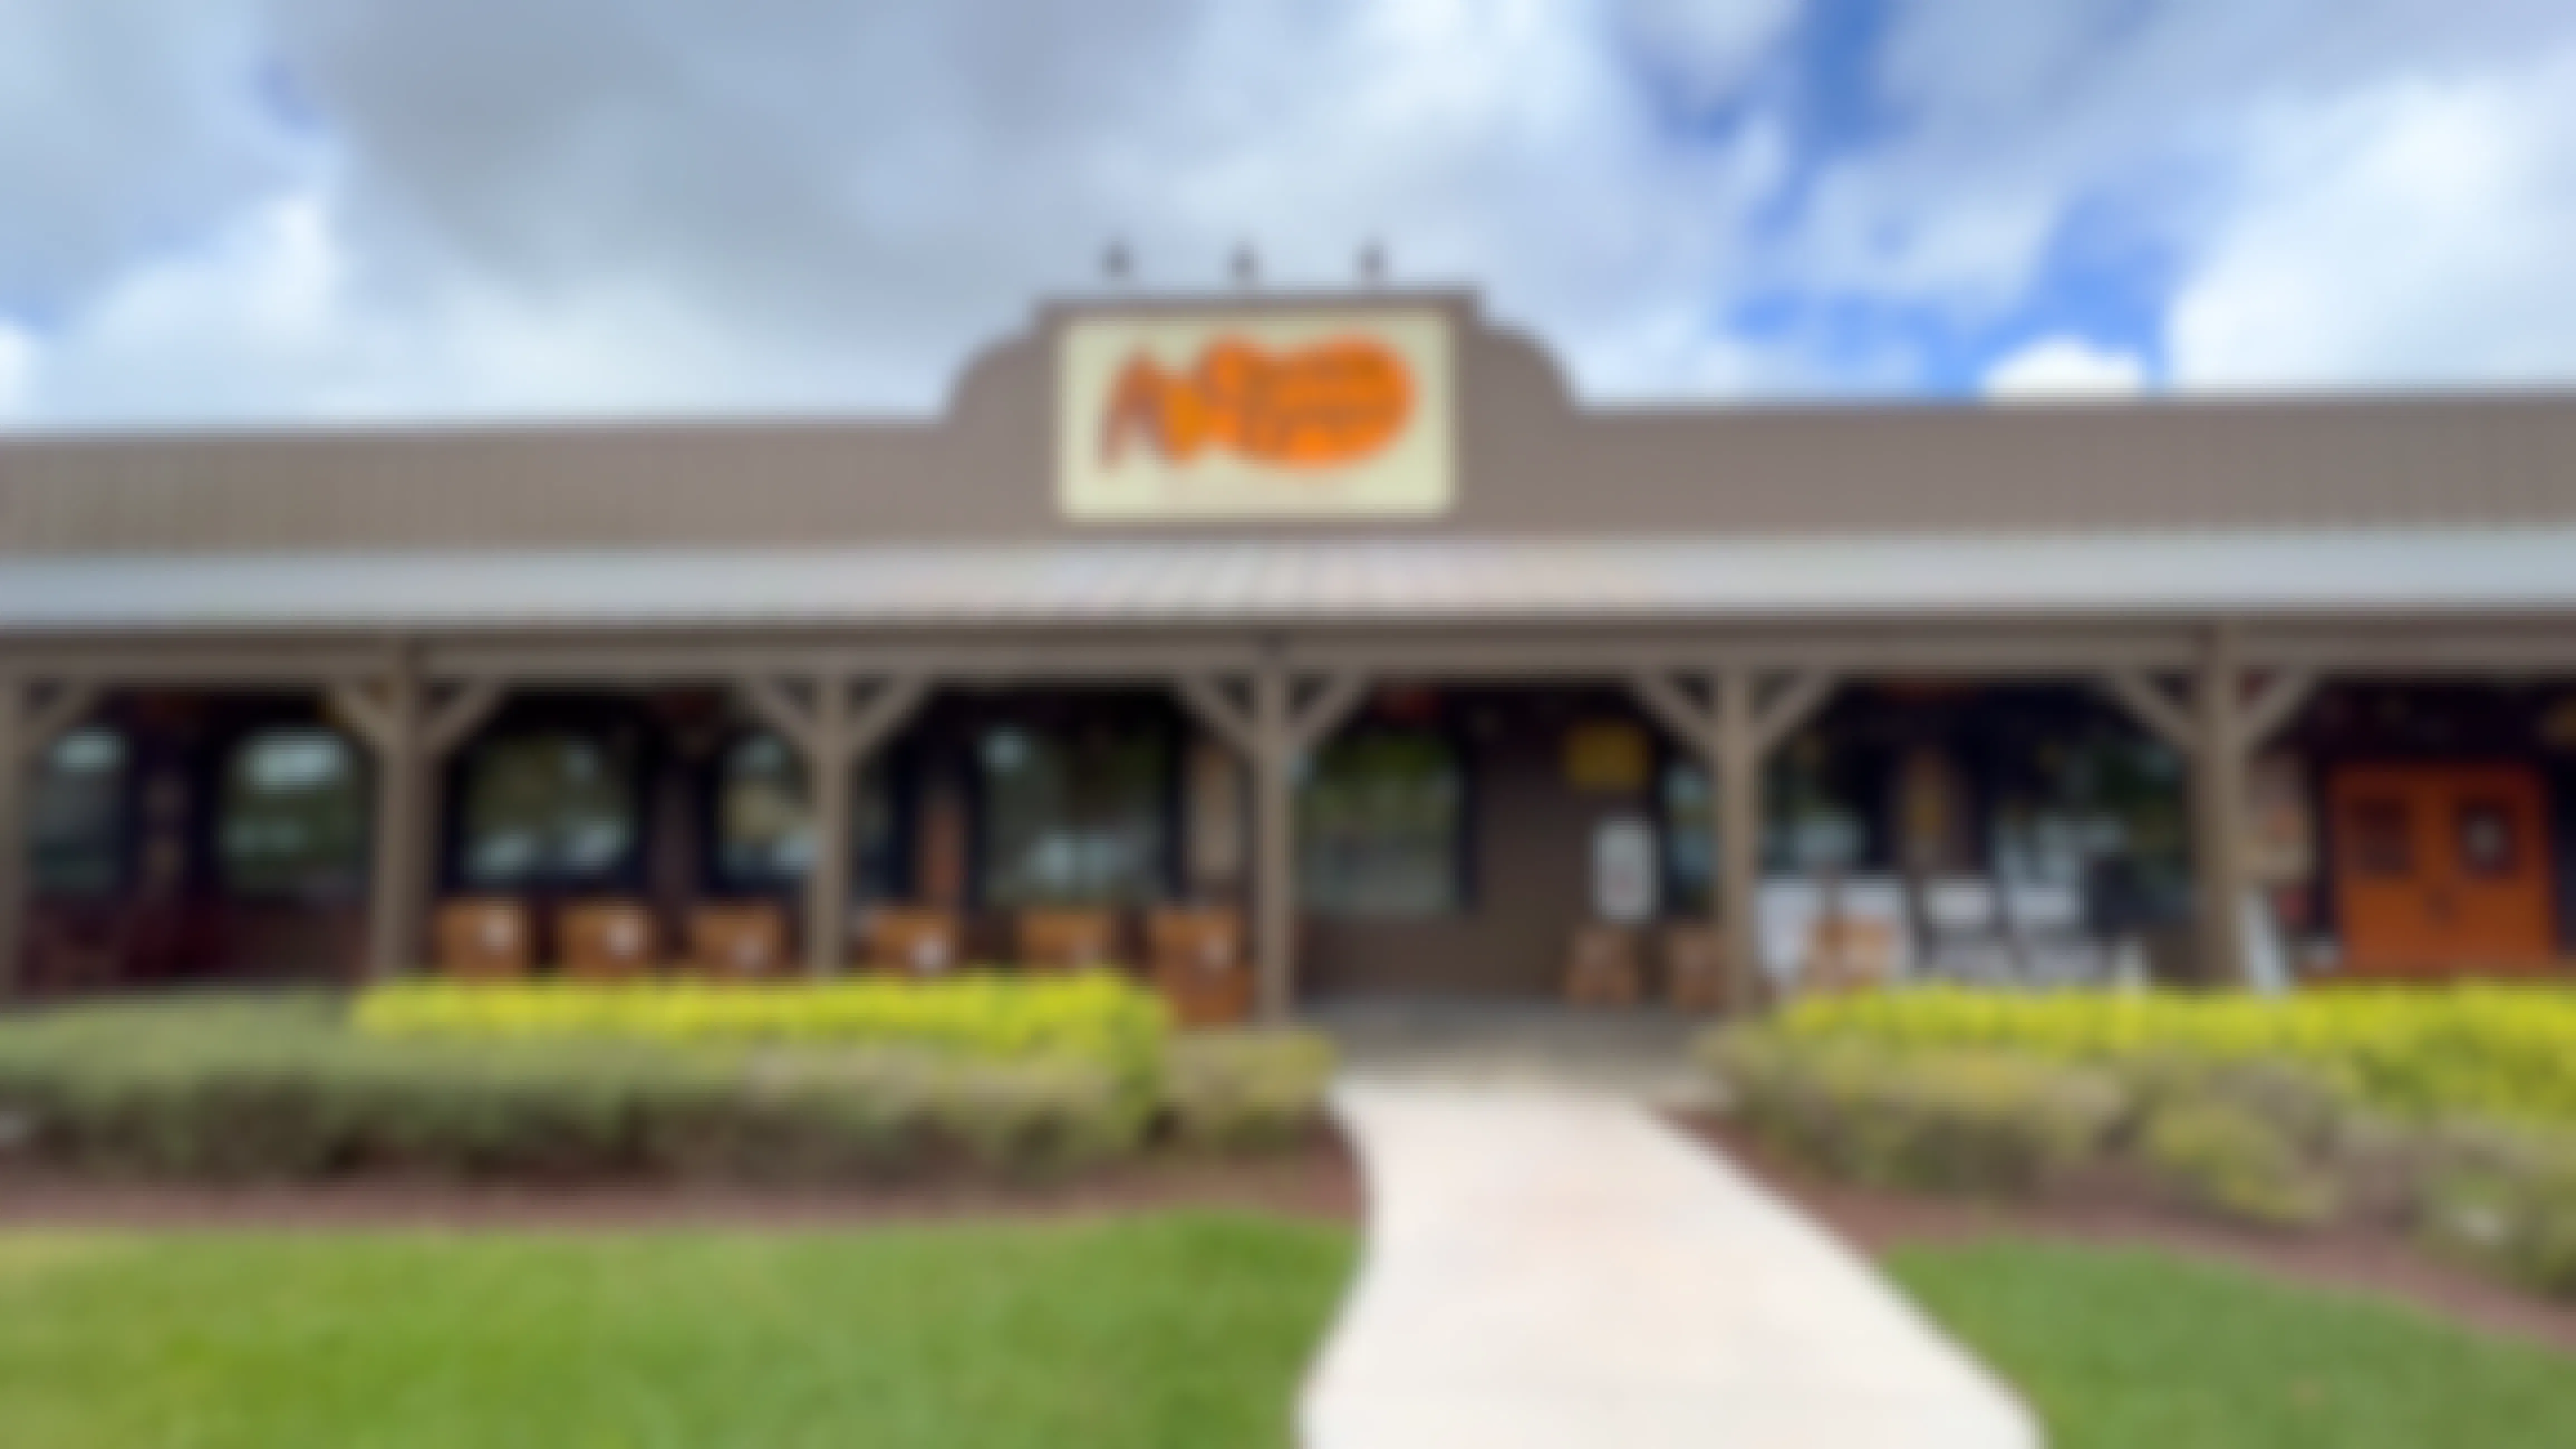 The Cracker Barrel Rewards Program Is Testing New Features in July